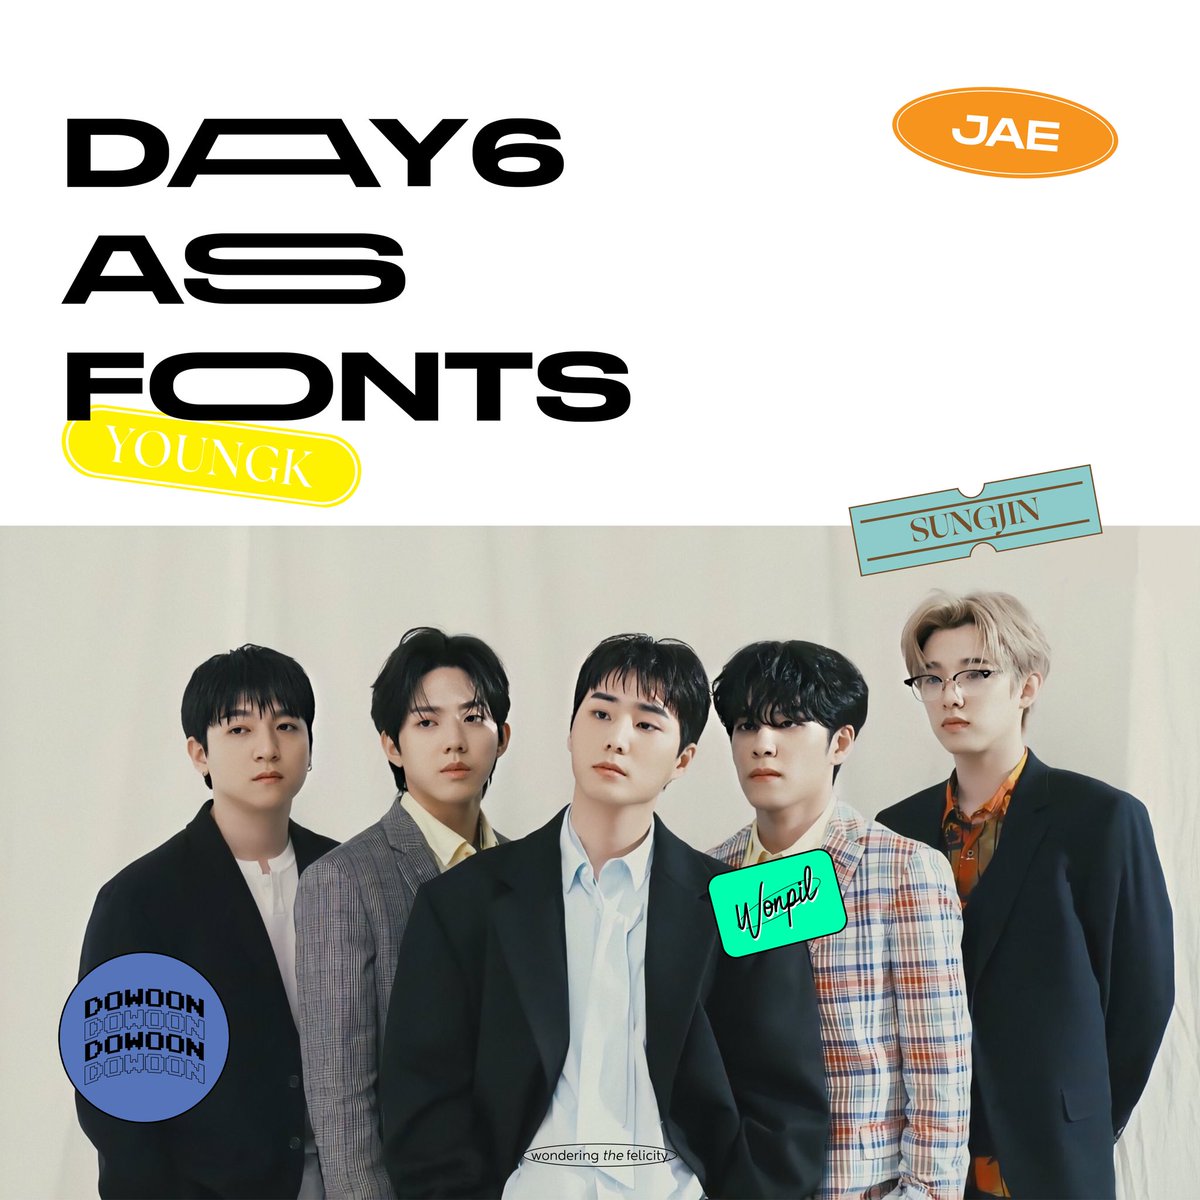 DAY6 as fonts─a thread. @day6official  #DAY6  #데이식스